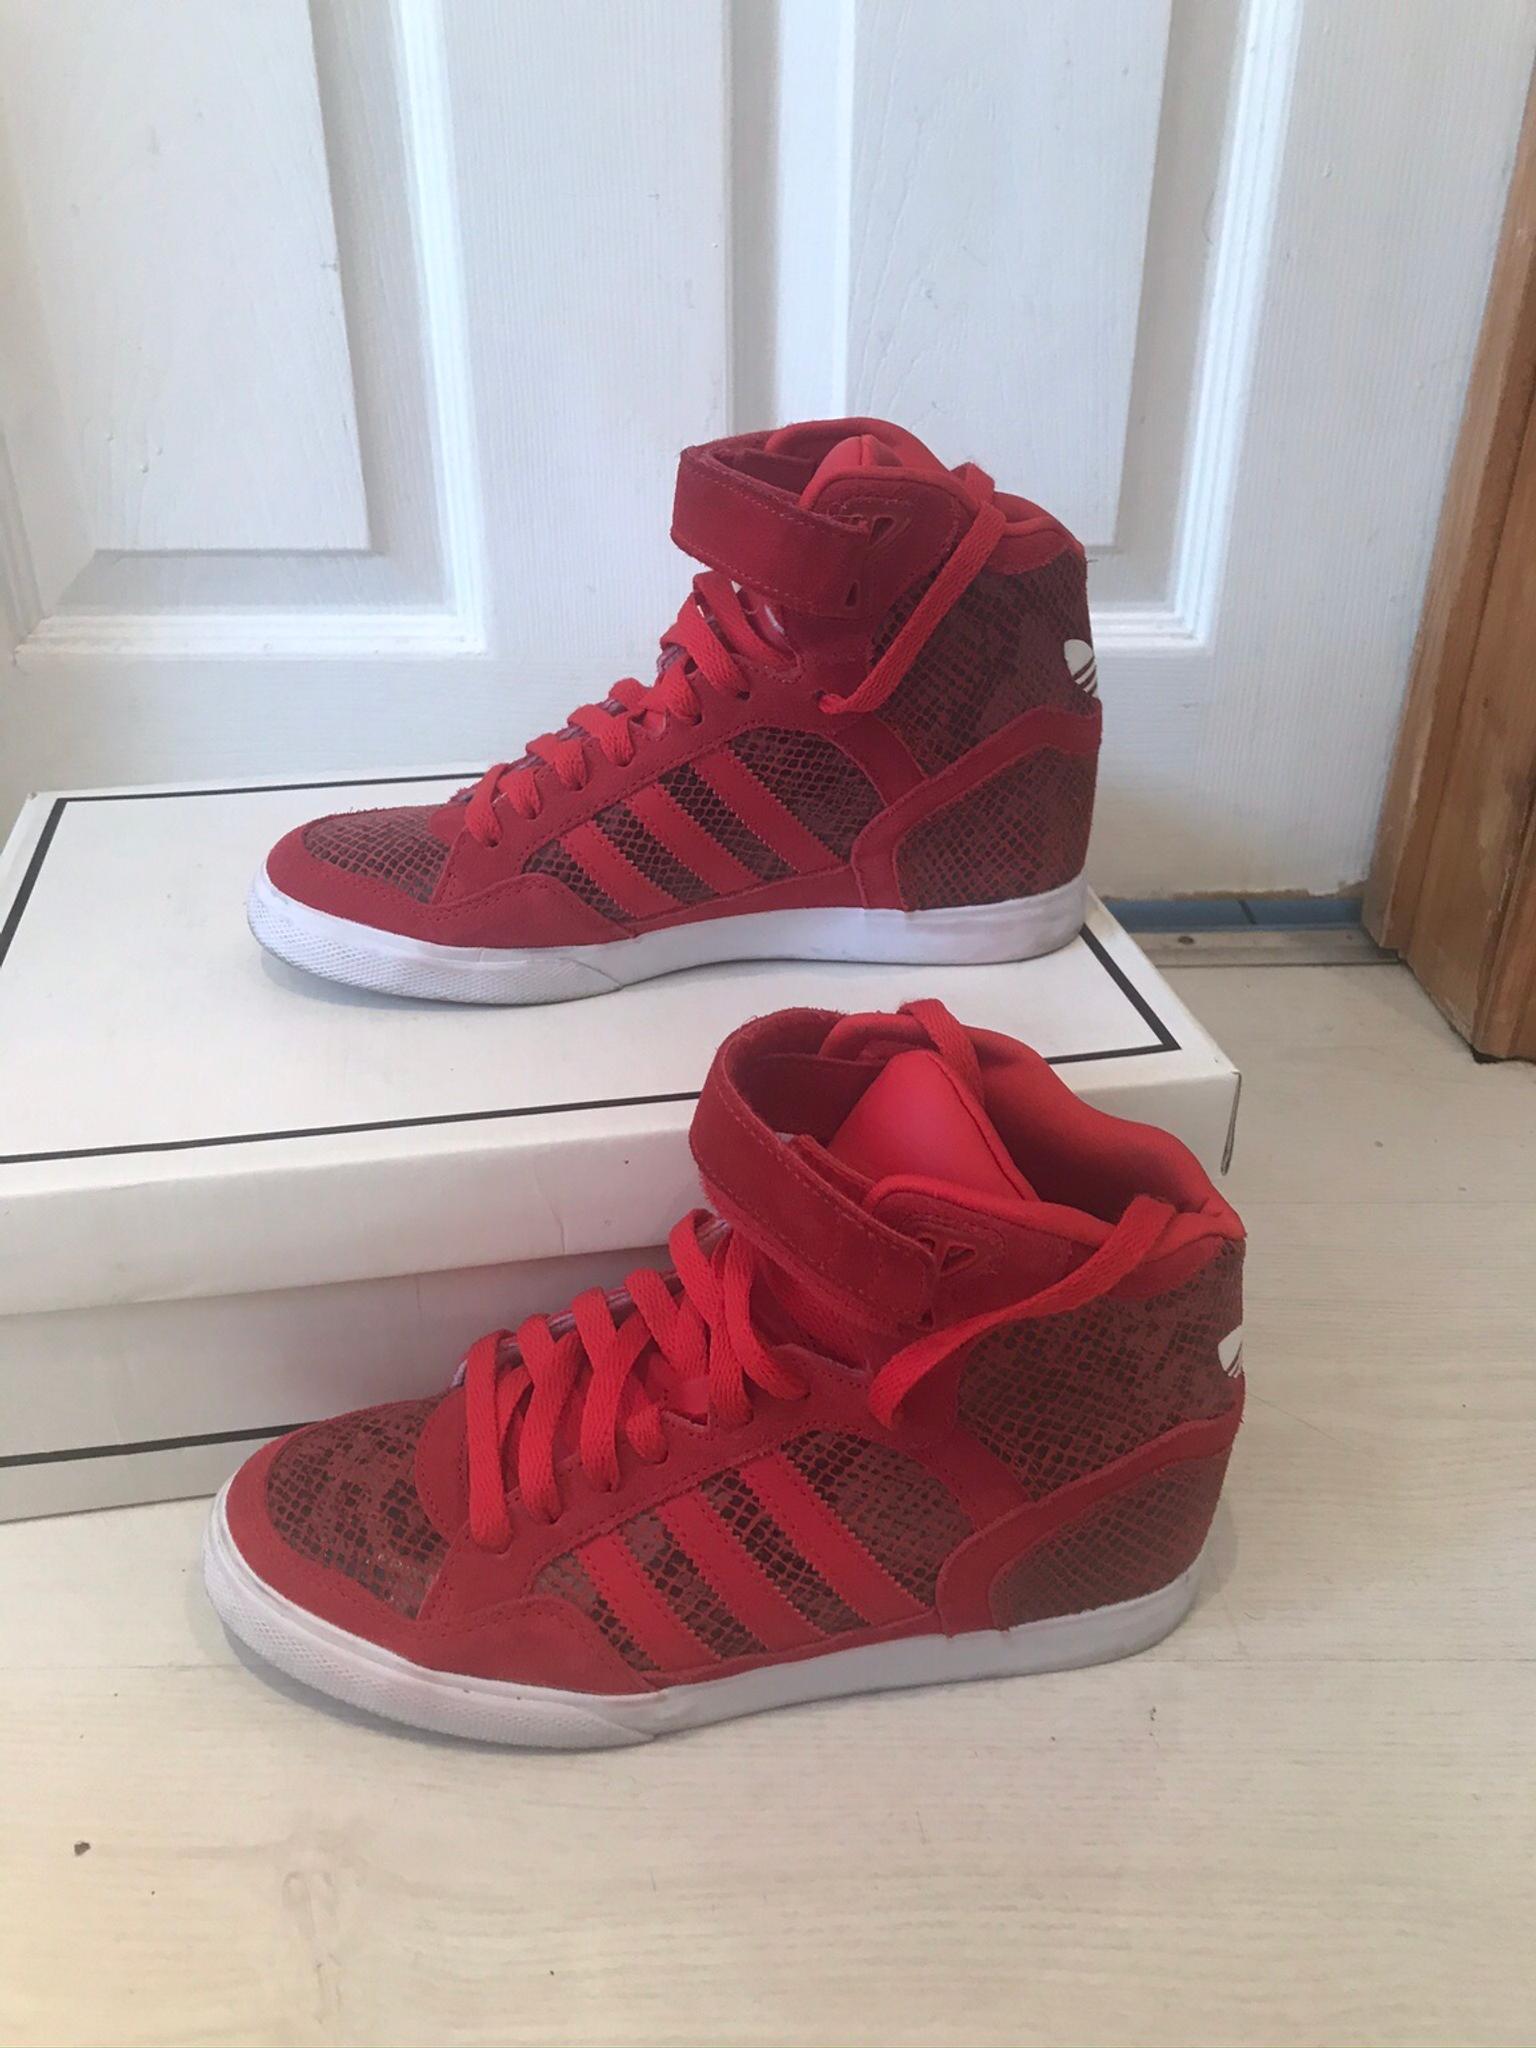 adidas high tops limited edition